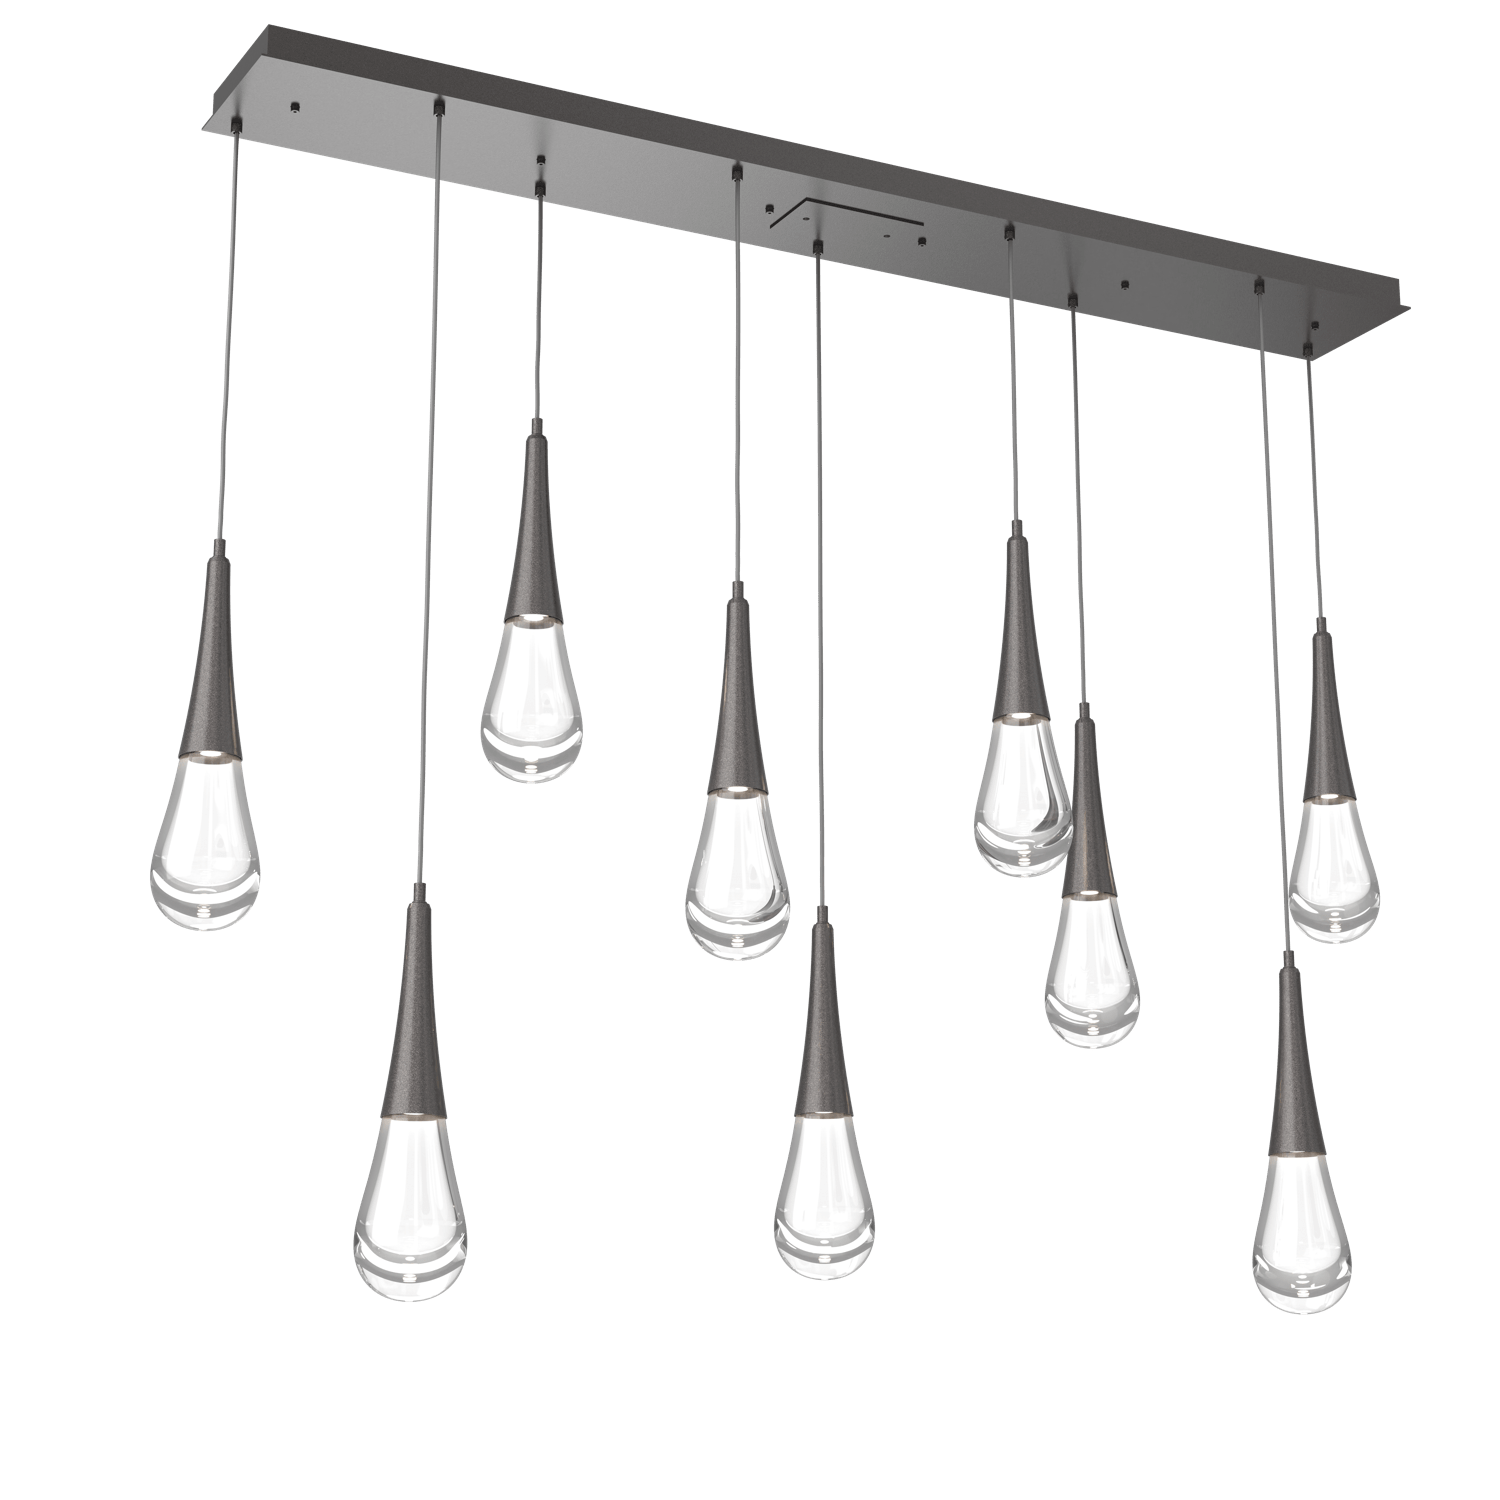 PLB0078-09-GP-Hammerton-Studio-Raindrop-9-light-linear-pendant-chandelier-with-graphite-finish-and-clear-blown-glass-shades-and-LED-lamping